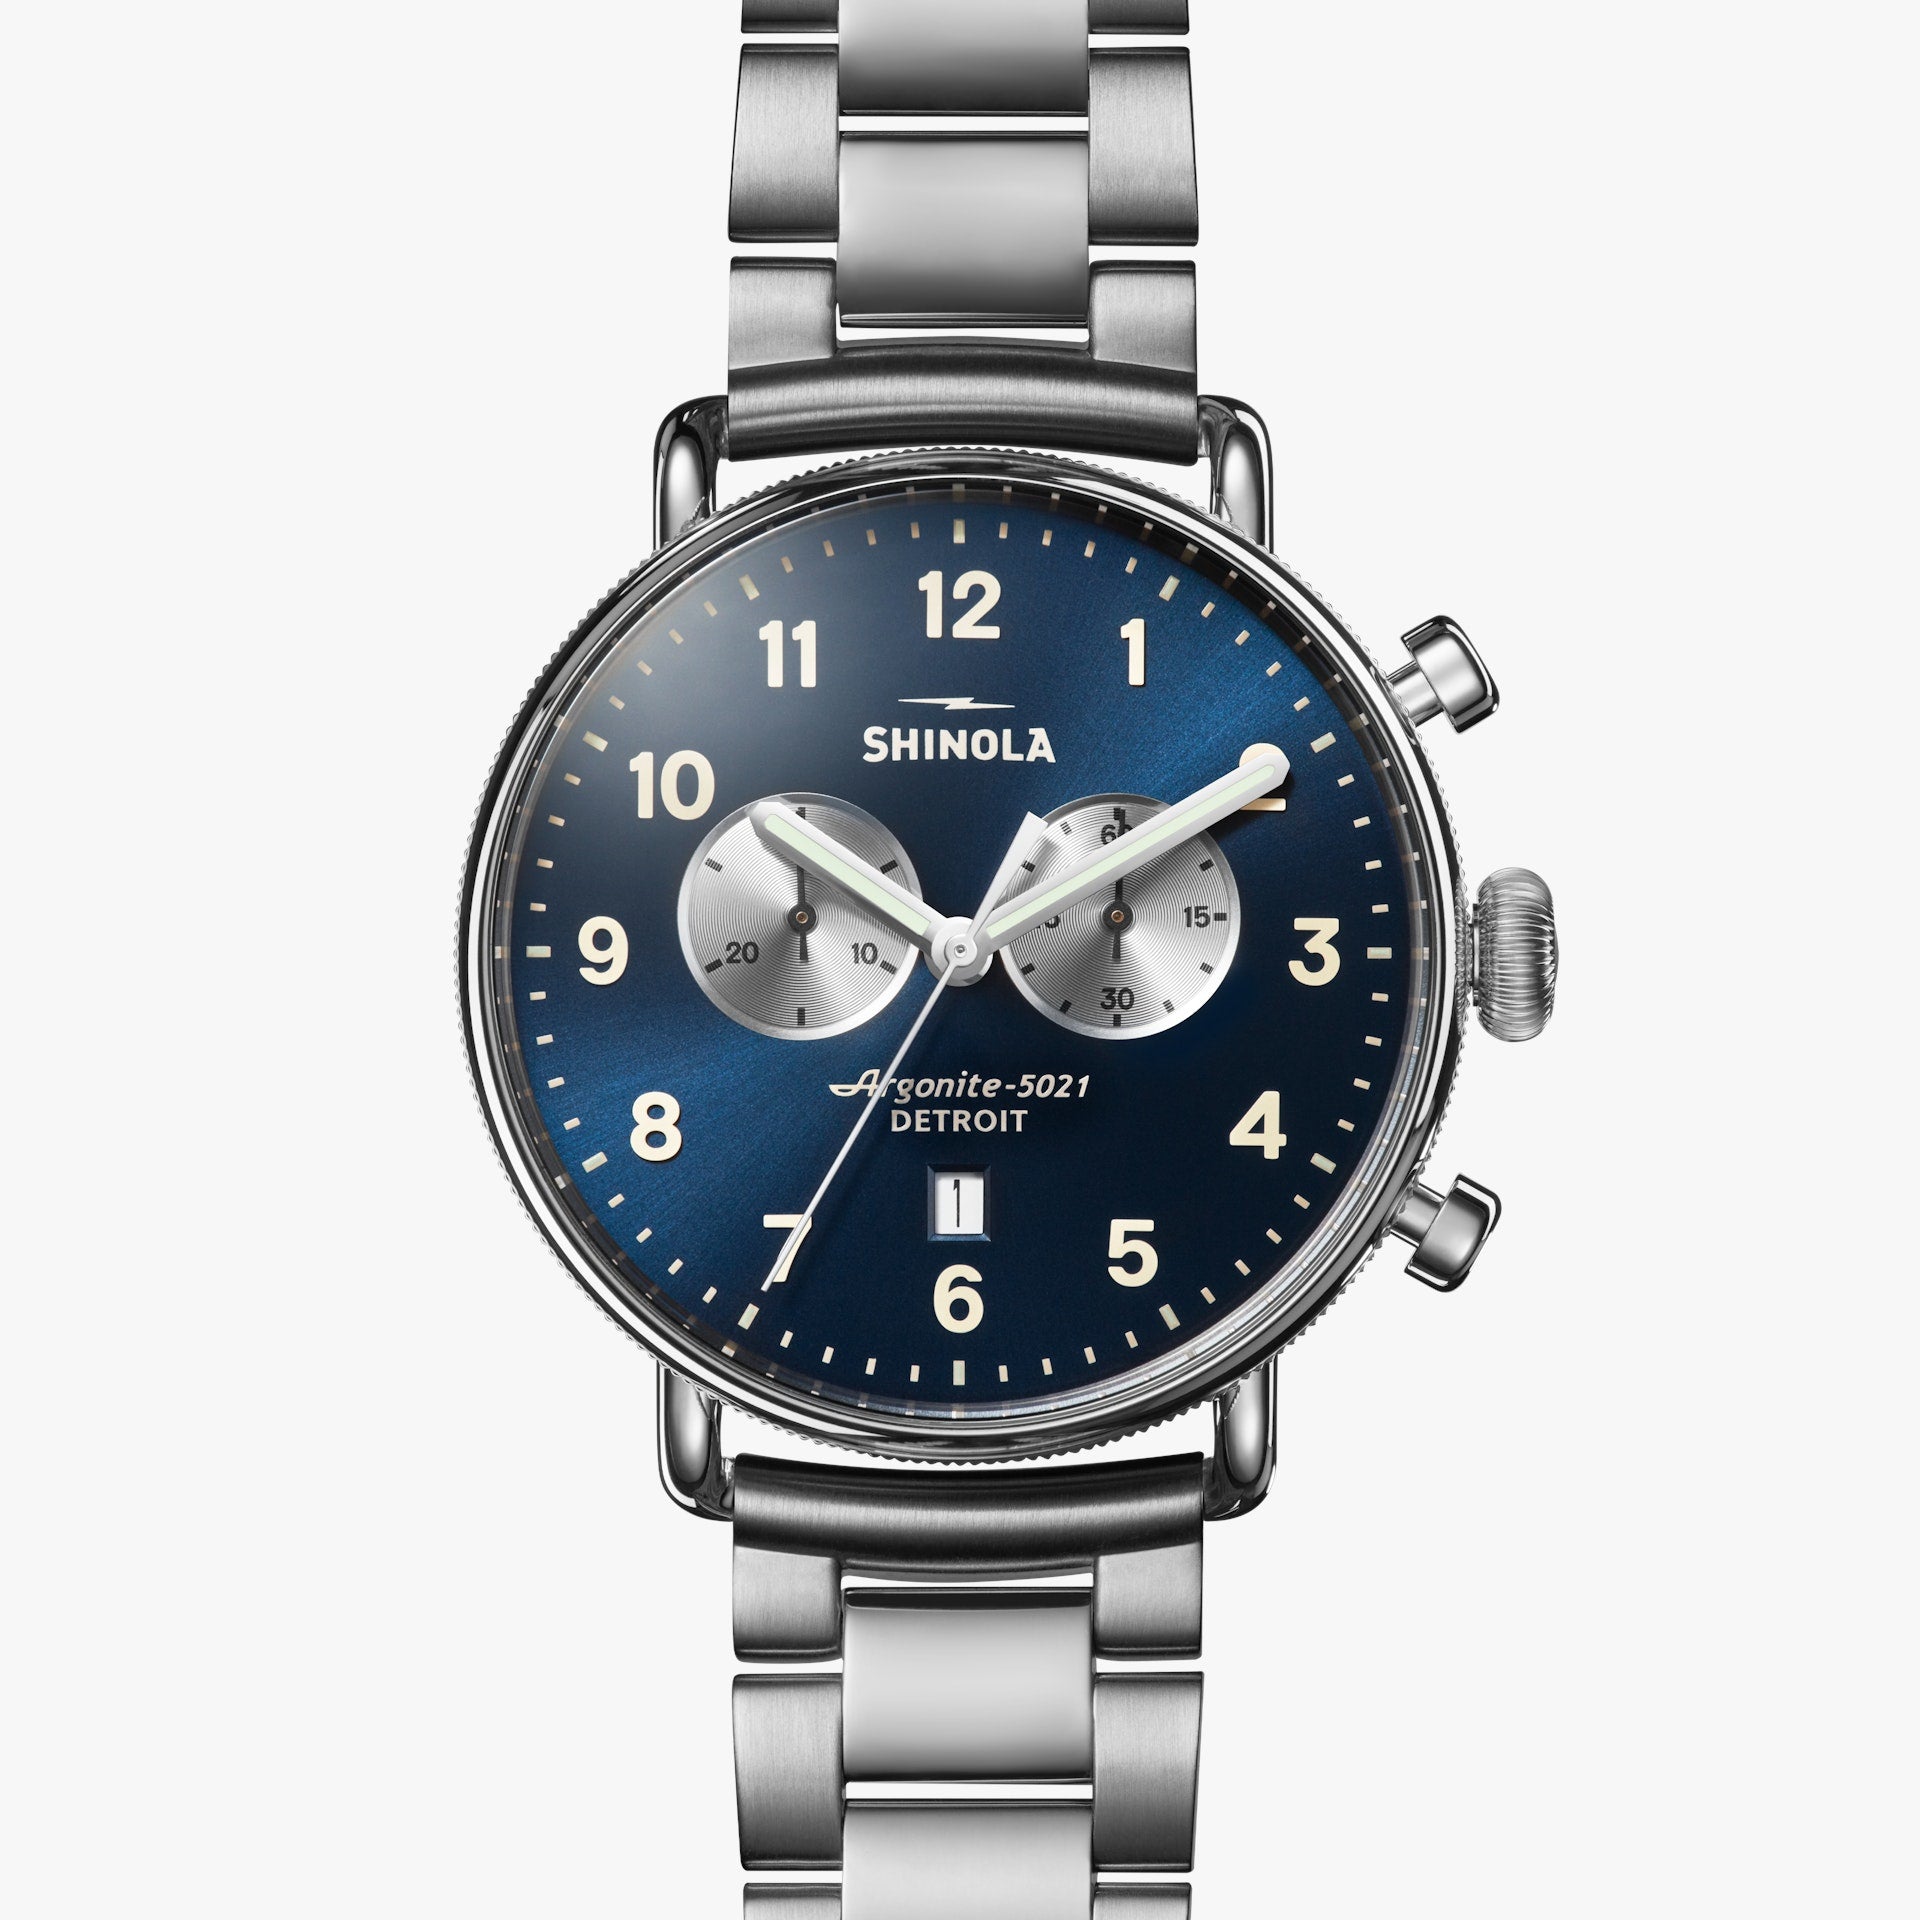 The Canfield Chrono 20283781-sdt-015540305